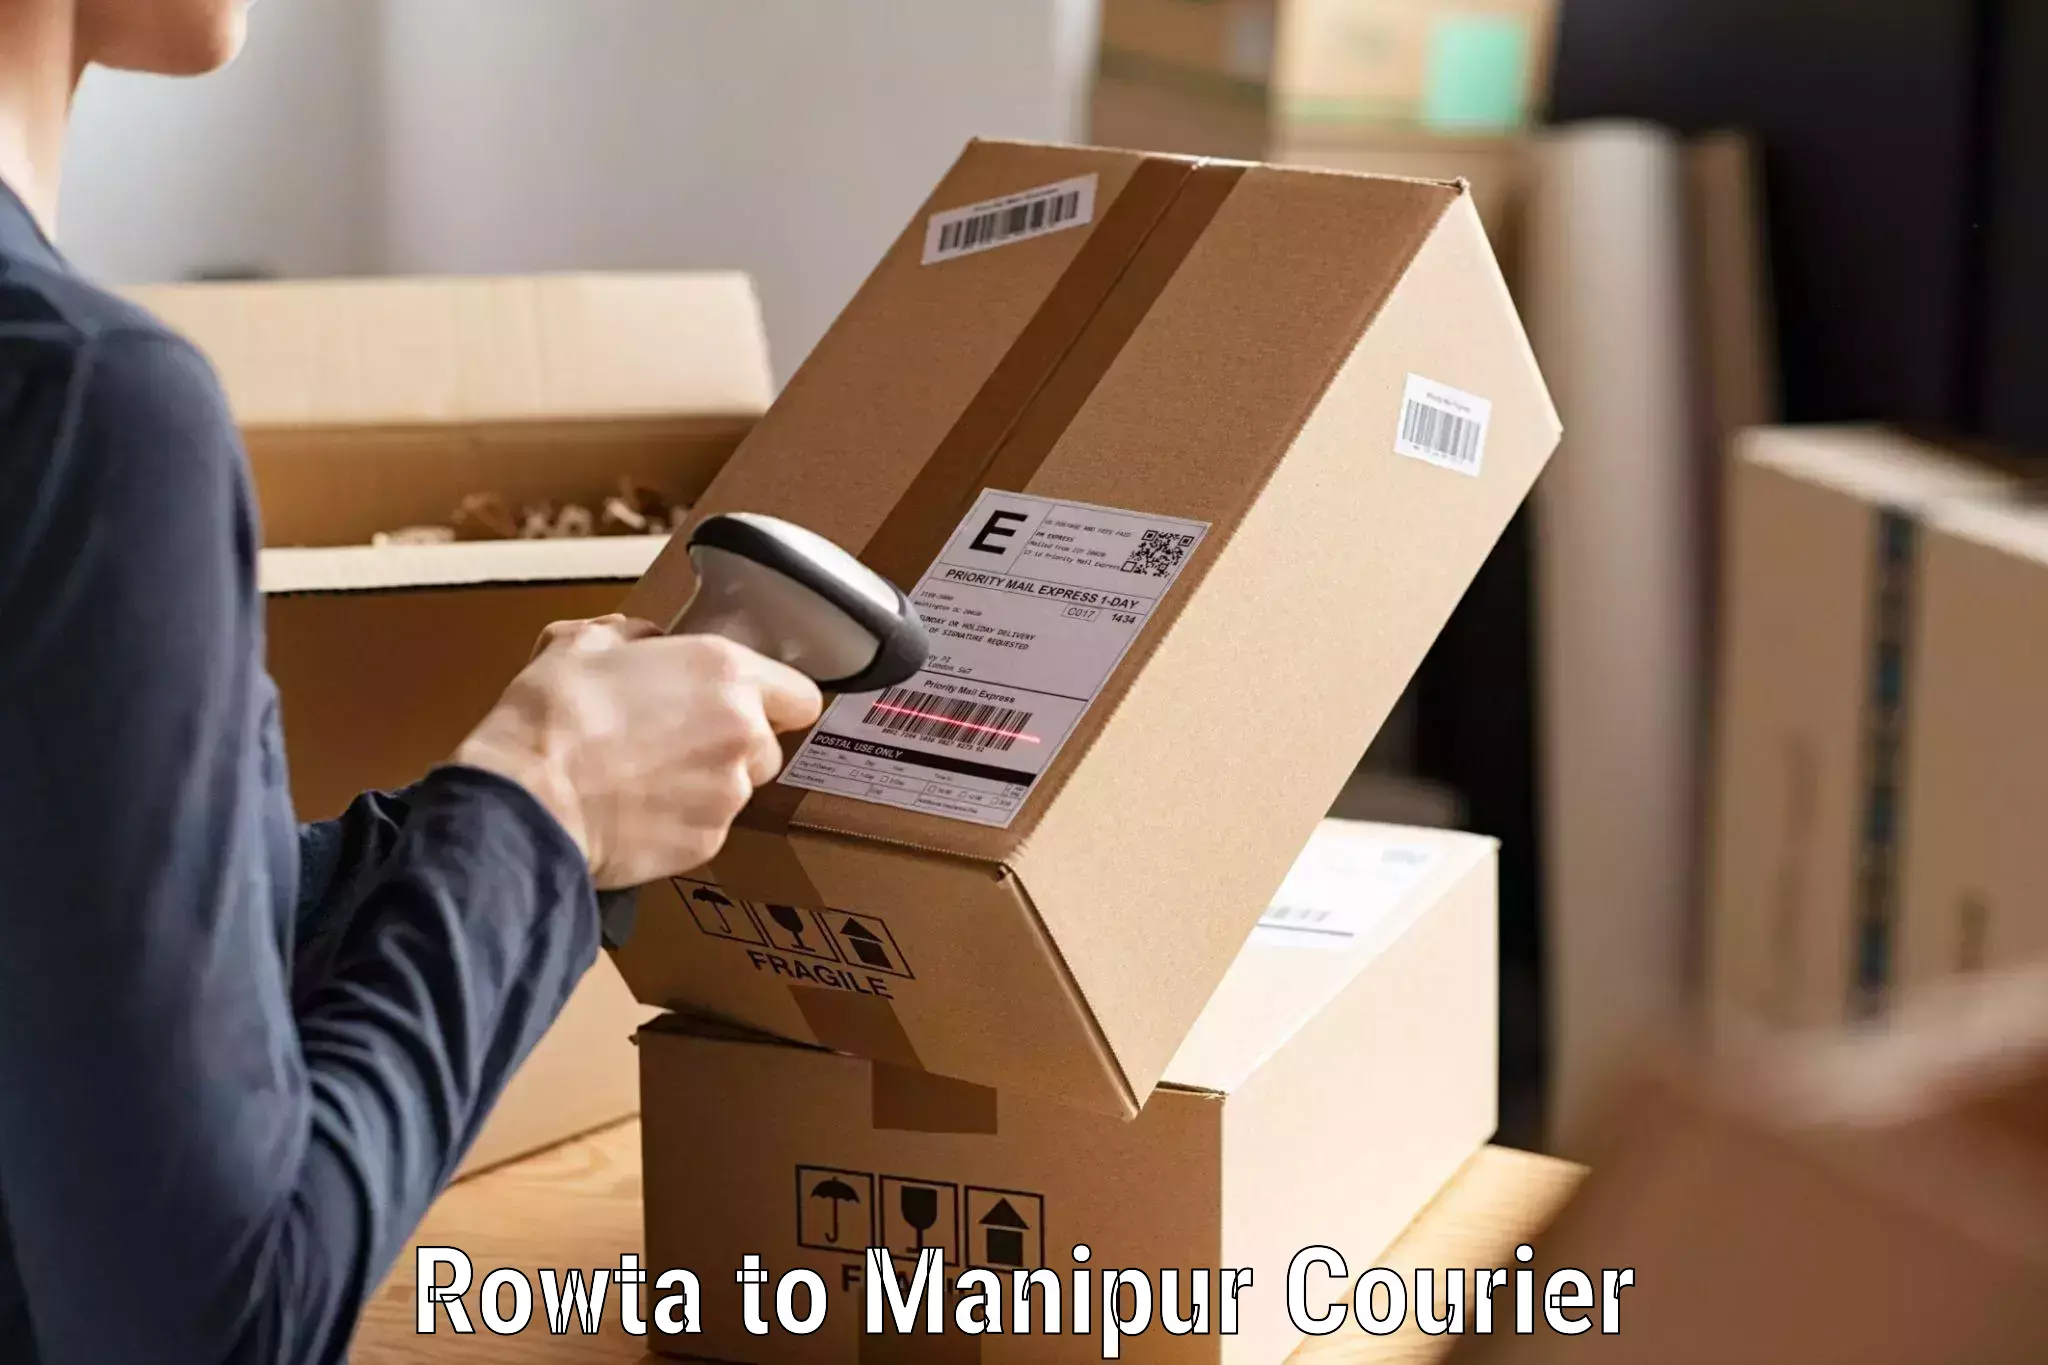 Delivery service partnership Rowta to Manipur